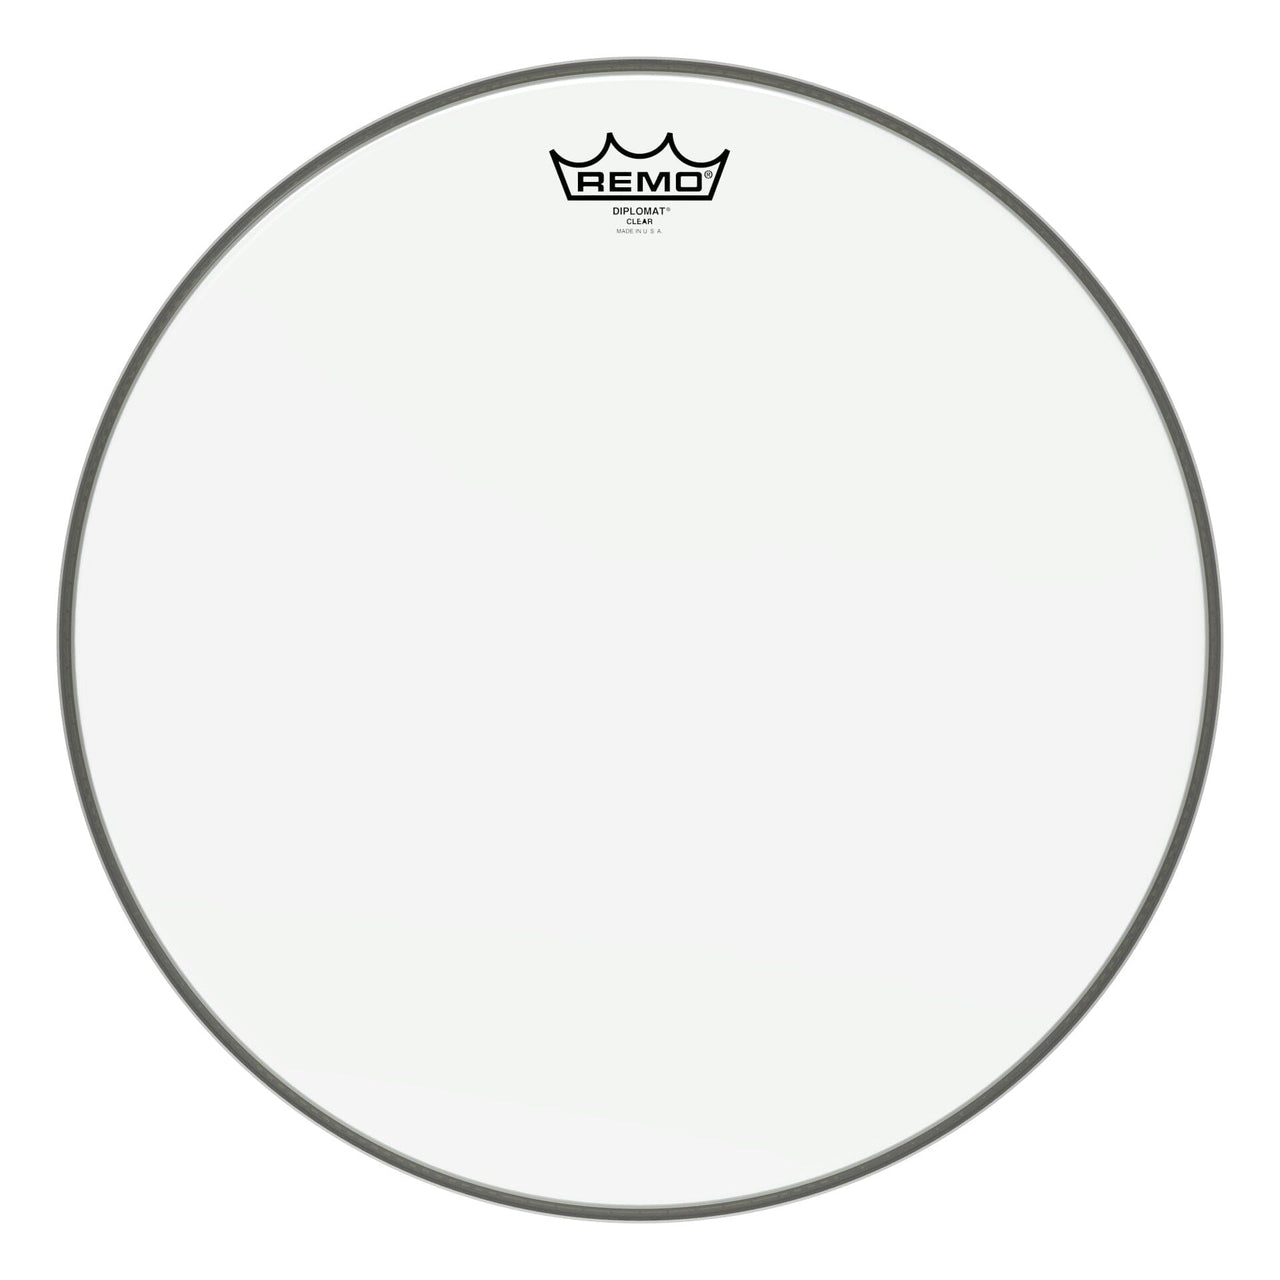 REMO 14" Clear Diplomat Drum Head (BD-0314-00) Drum Heads Remo 